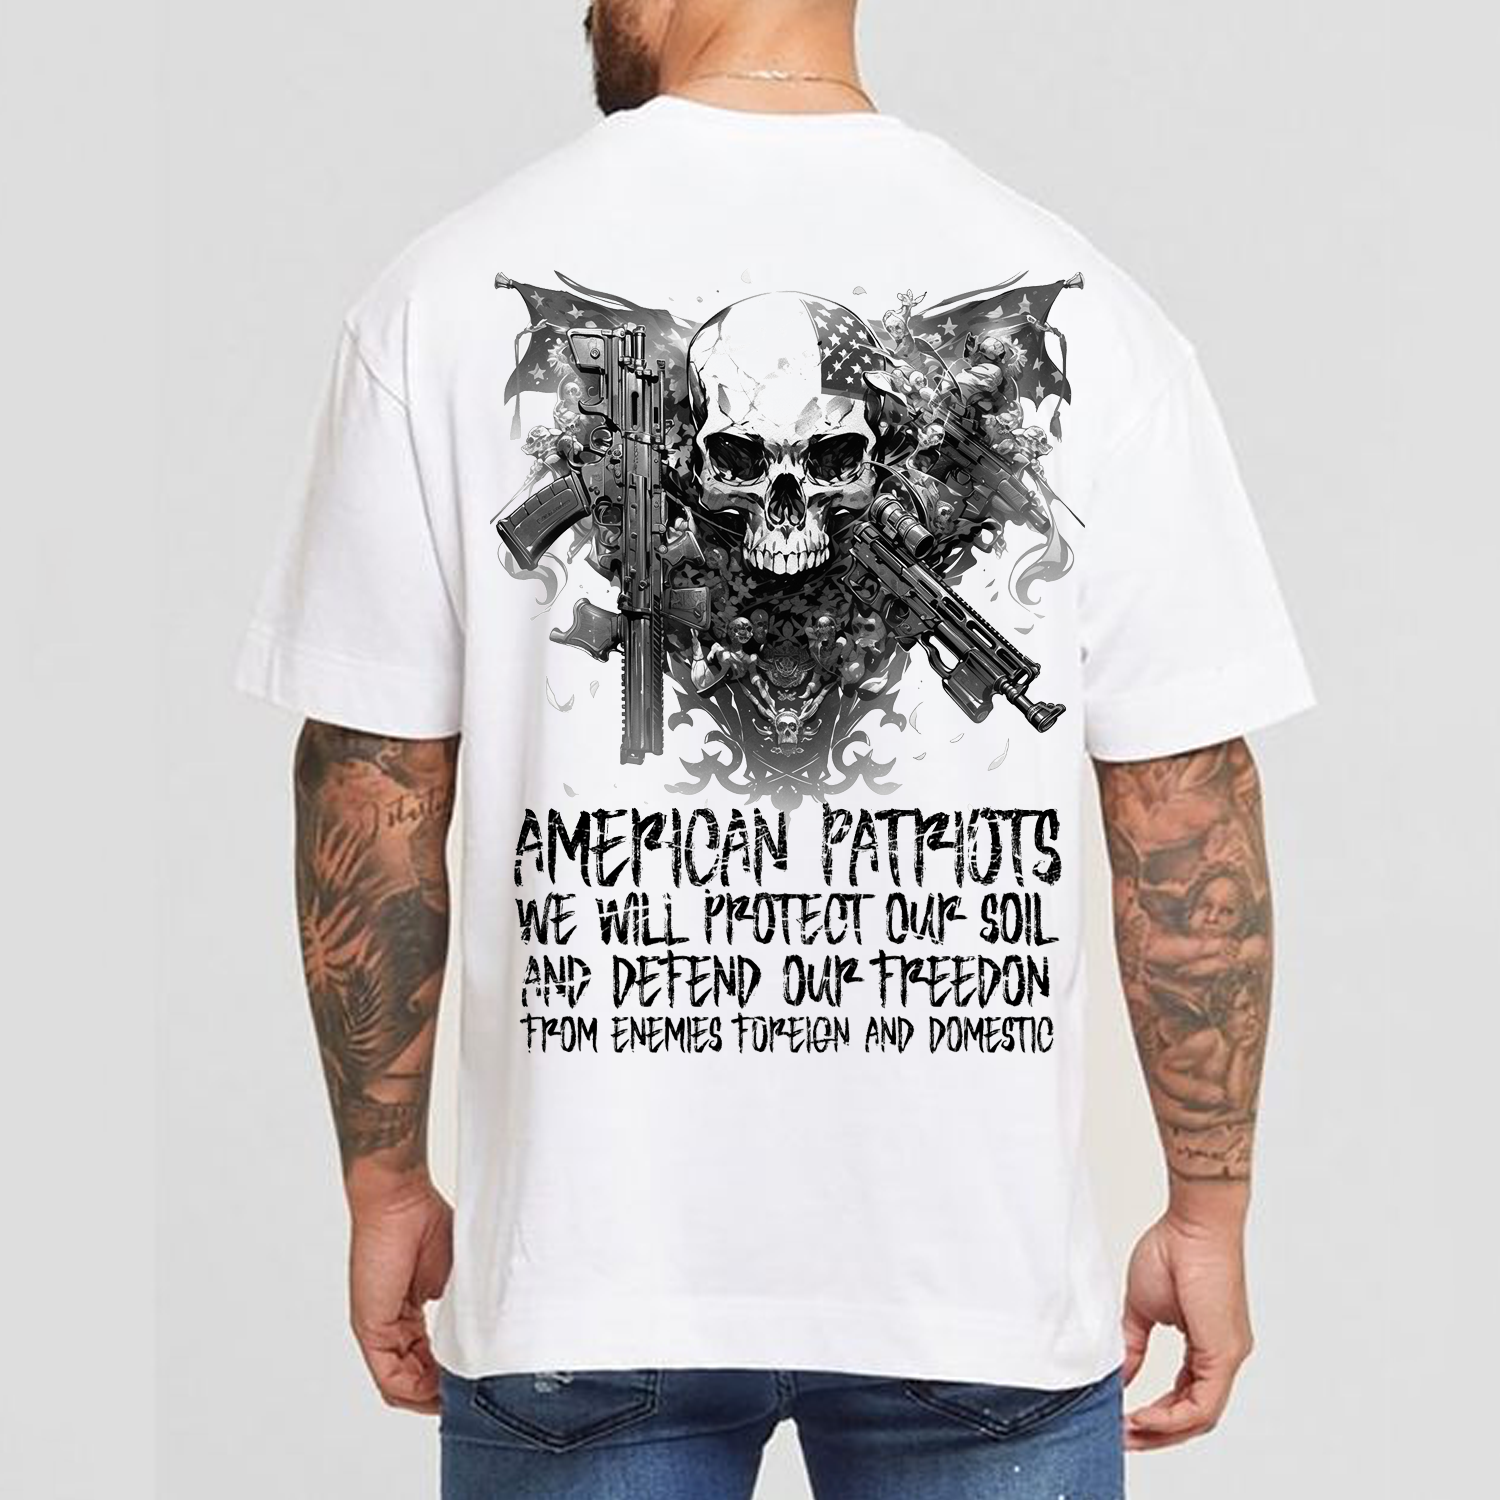 American Patriots We Will Protect Our Soil Men's Short Sleeve T-shirt